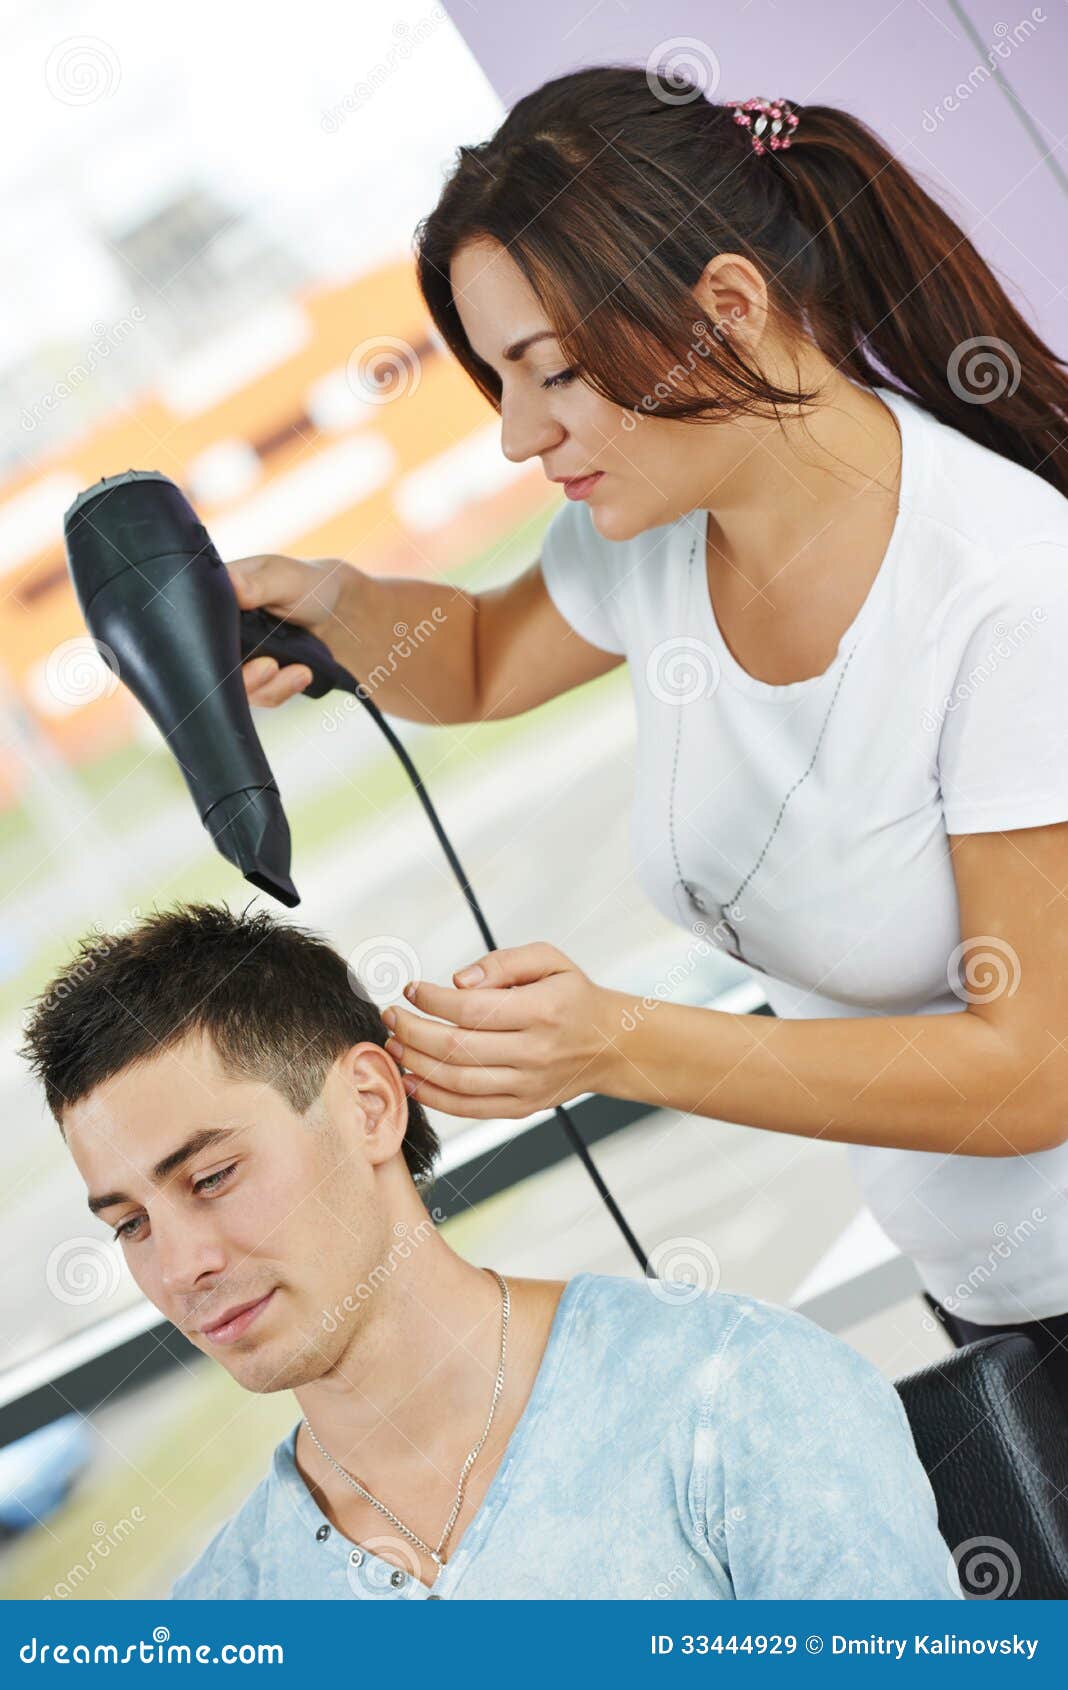 Premium Photo | Young man visiting barbershop hairdresser drying consumers  hair selfcare masculine beauty barb